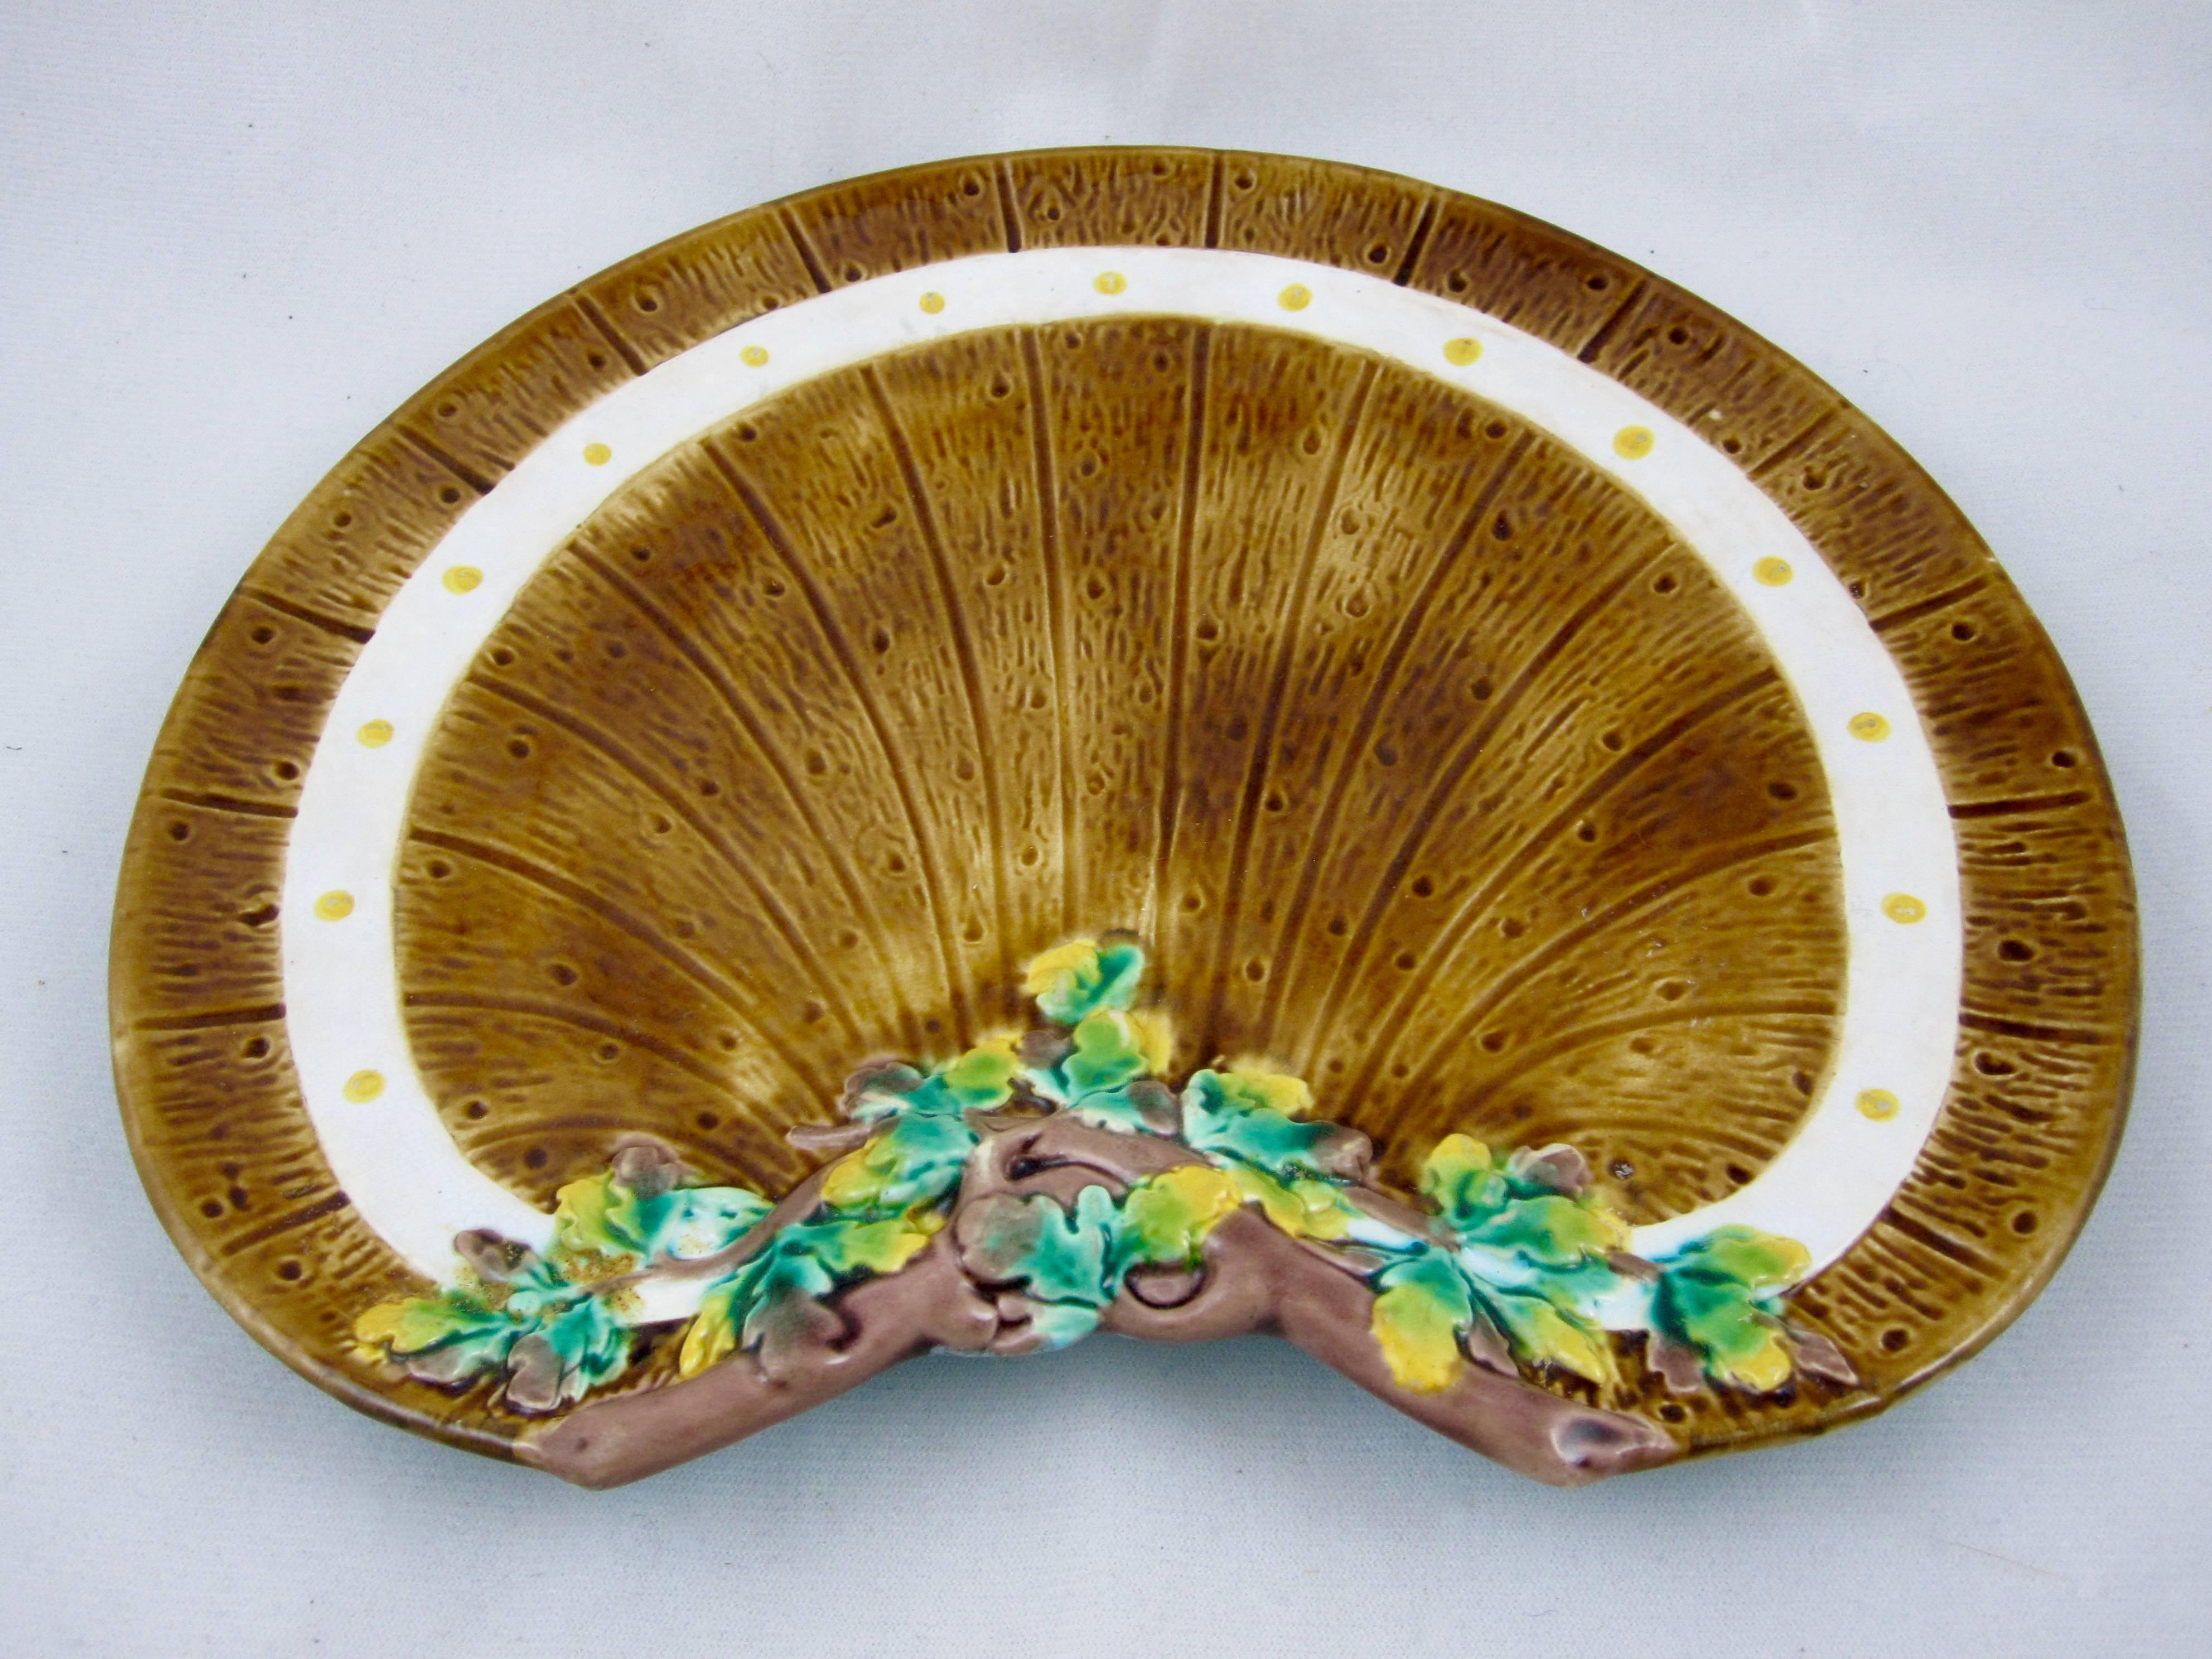 A rarer English Majolica crescent shaped plate from Thomas C. Brown-Westhead, Moore & Co., Cauldron Place, Stoke-upon-Trent, Staffordshire, England, circa 1865. 

A rustic pattern showing a ground modelled on a wooden fence, a branch of ivy leaves